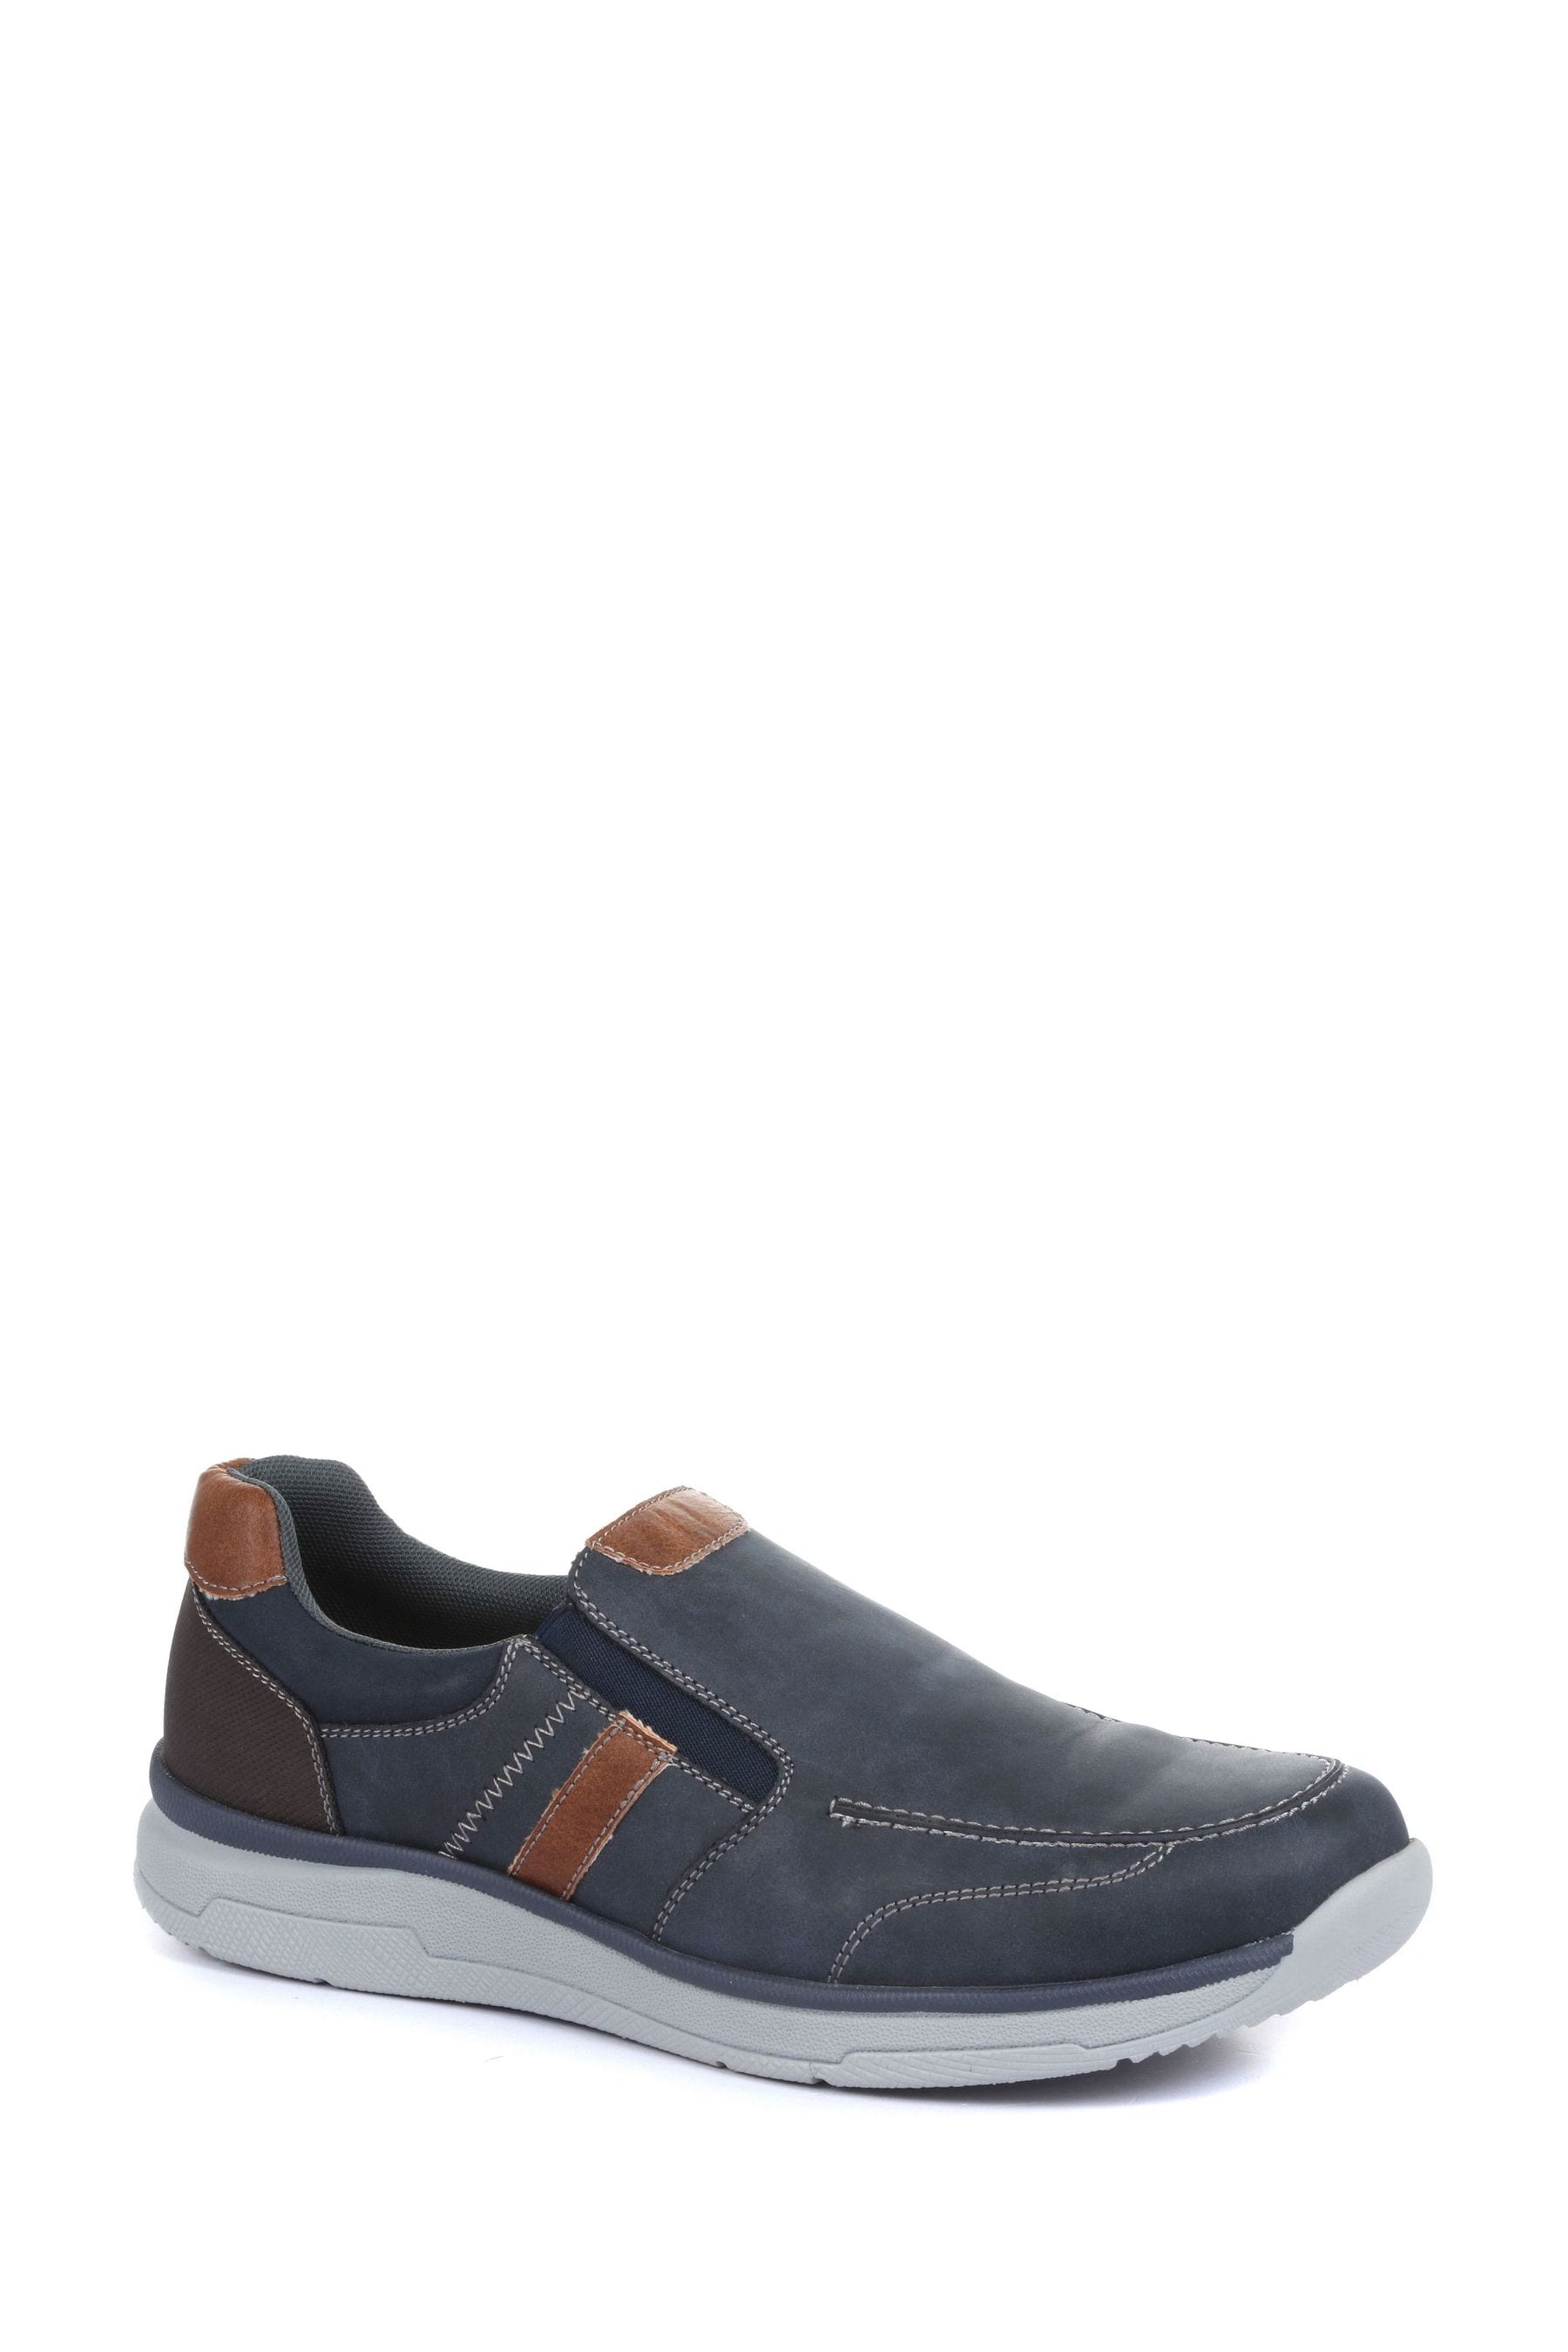 Buy Pavers Blue Mens Wide Fit Slip-On Trainers from the Next UK online shop